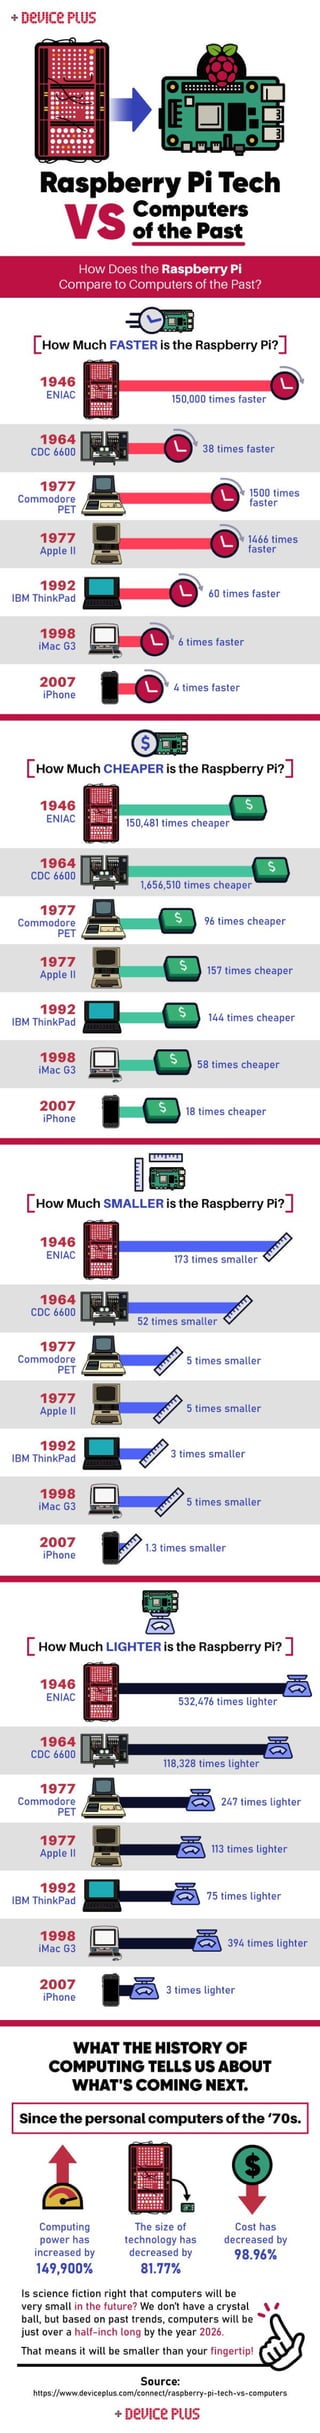 How Does the Raspberry Pi Compare to Computers of the Past?